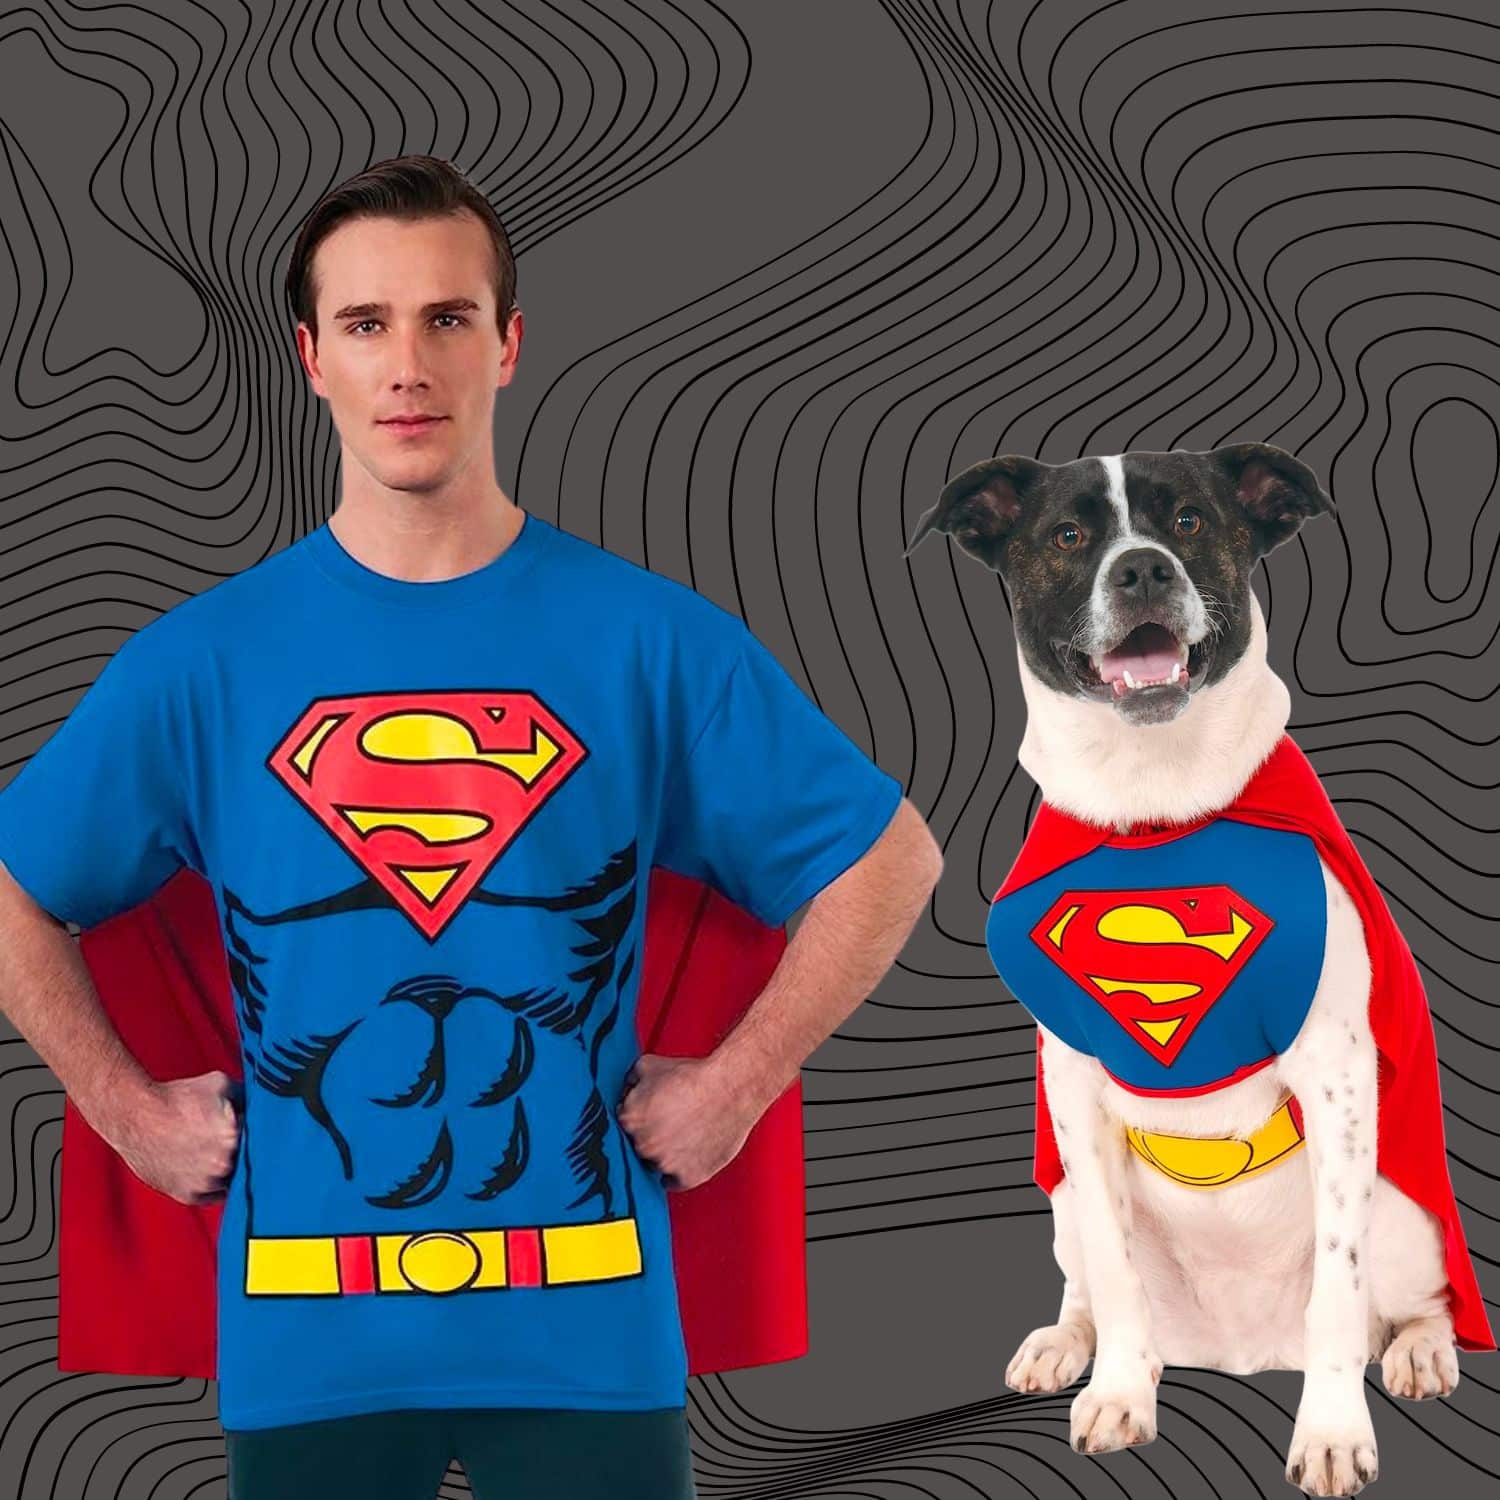 Dog and owner halloween costumes Superman - dog Christmas ornaments | PawCool ™